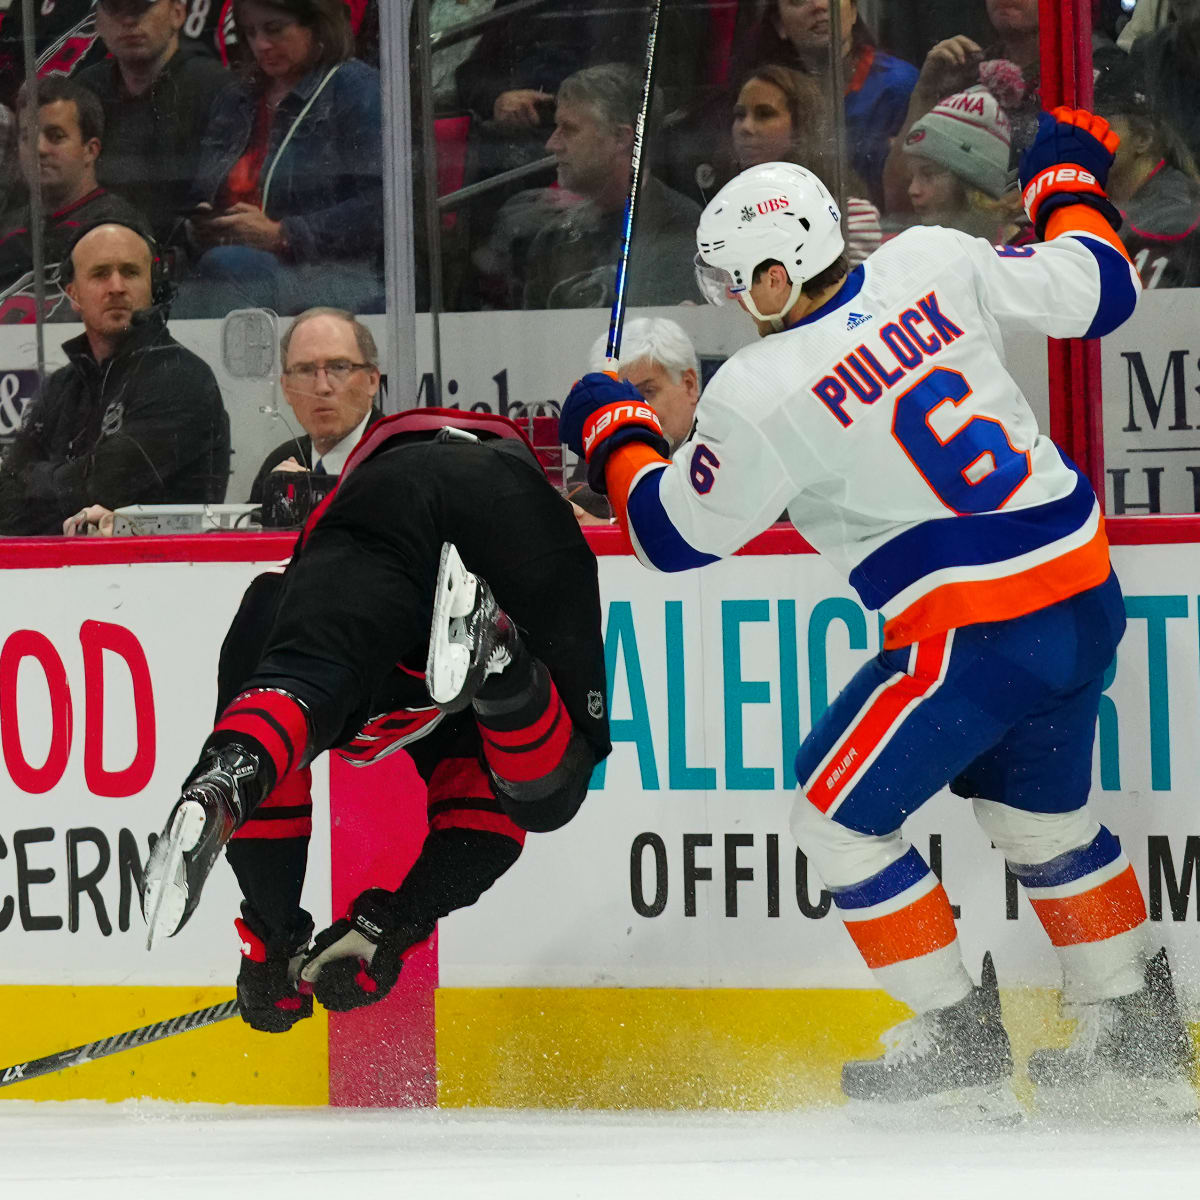 Islanders beat Rangers 3-0 to clinch playoff spot